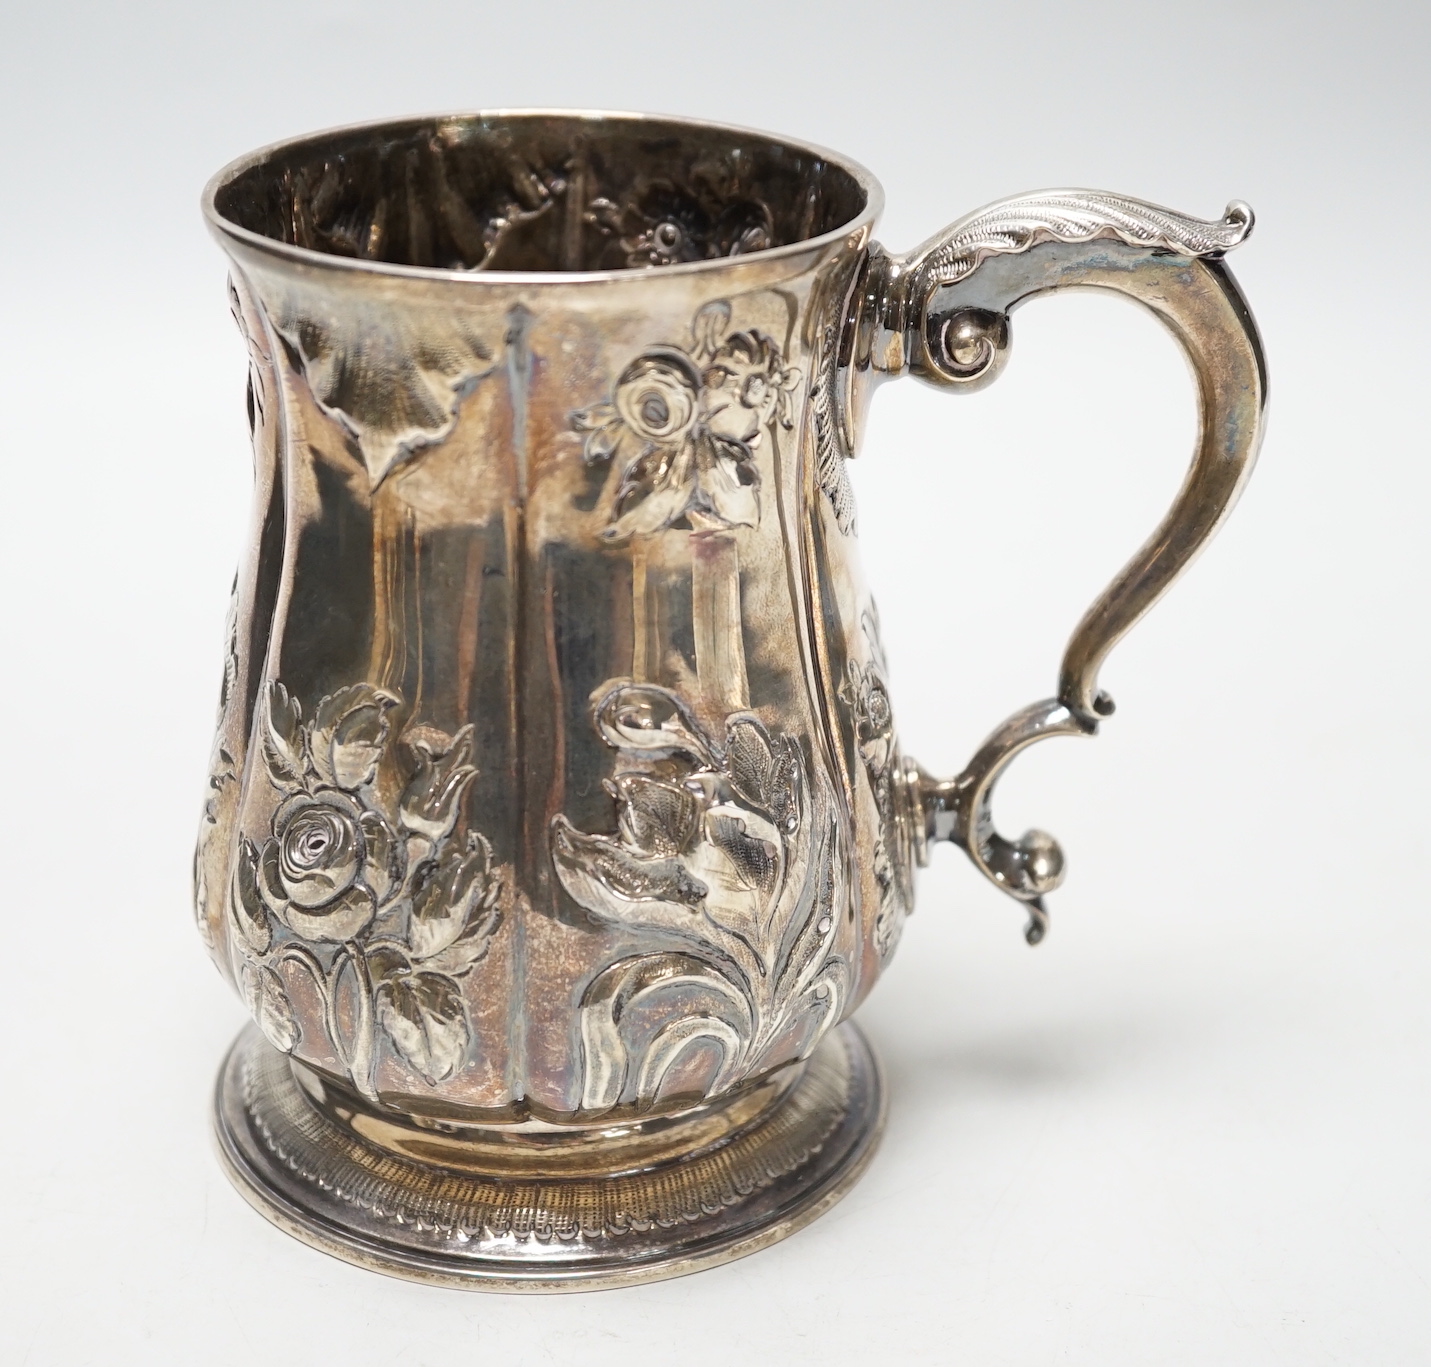 A George III silver baluster mug, with later embossed decoration, Joseph Steward?, London, 1763, 12.9cm, 11.8oz.                                                                                                            